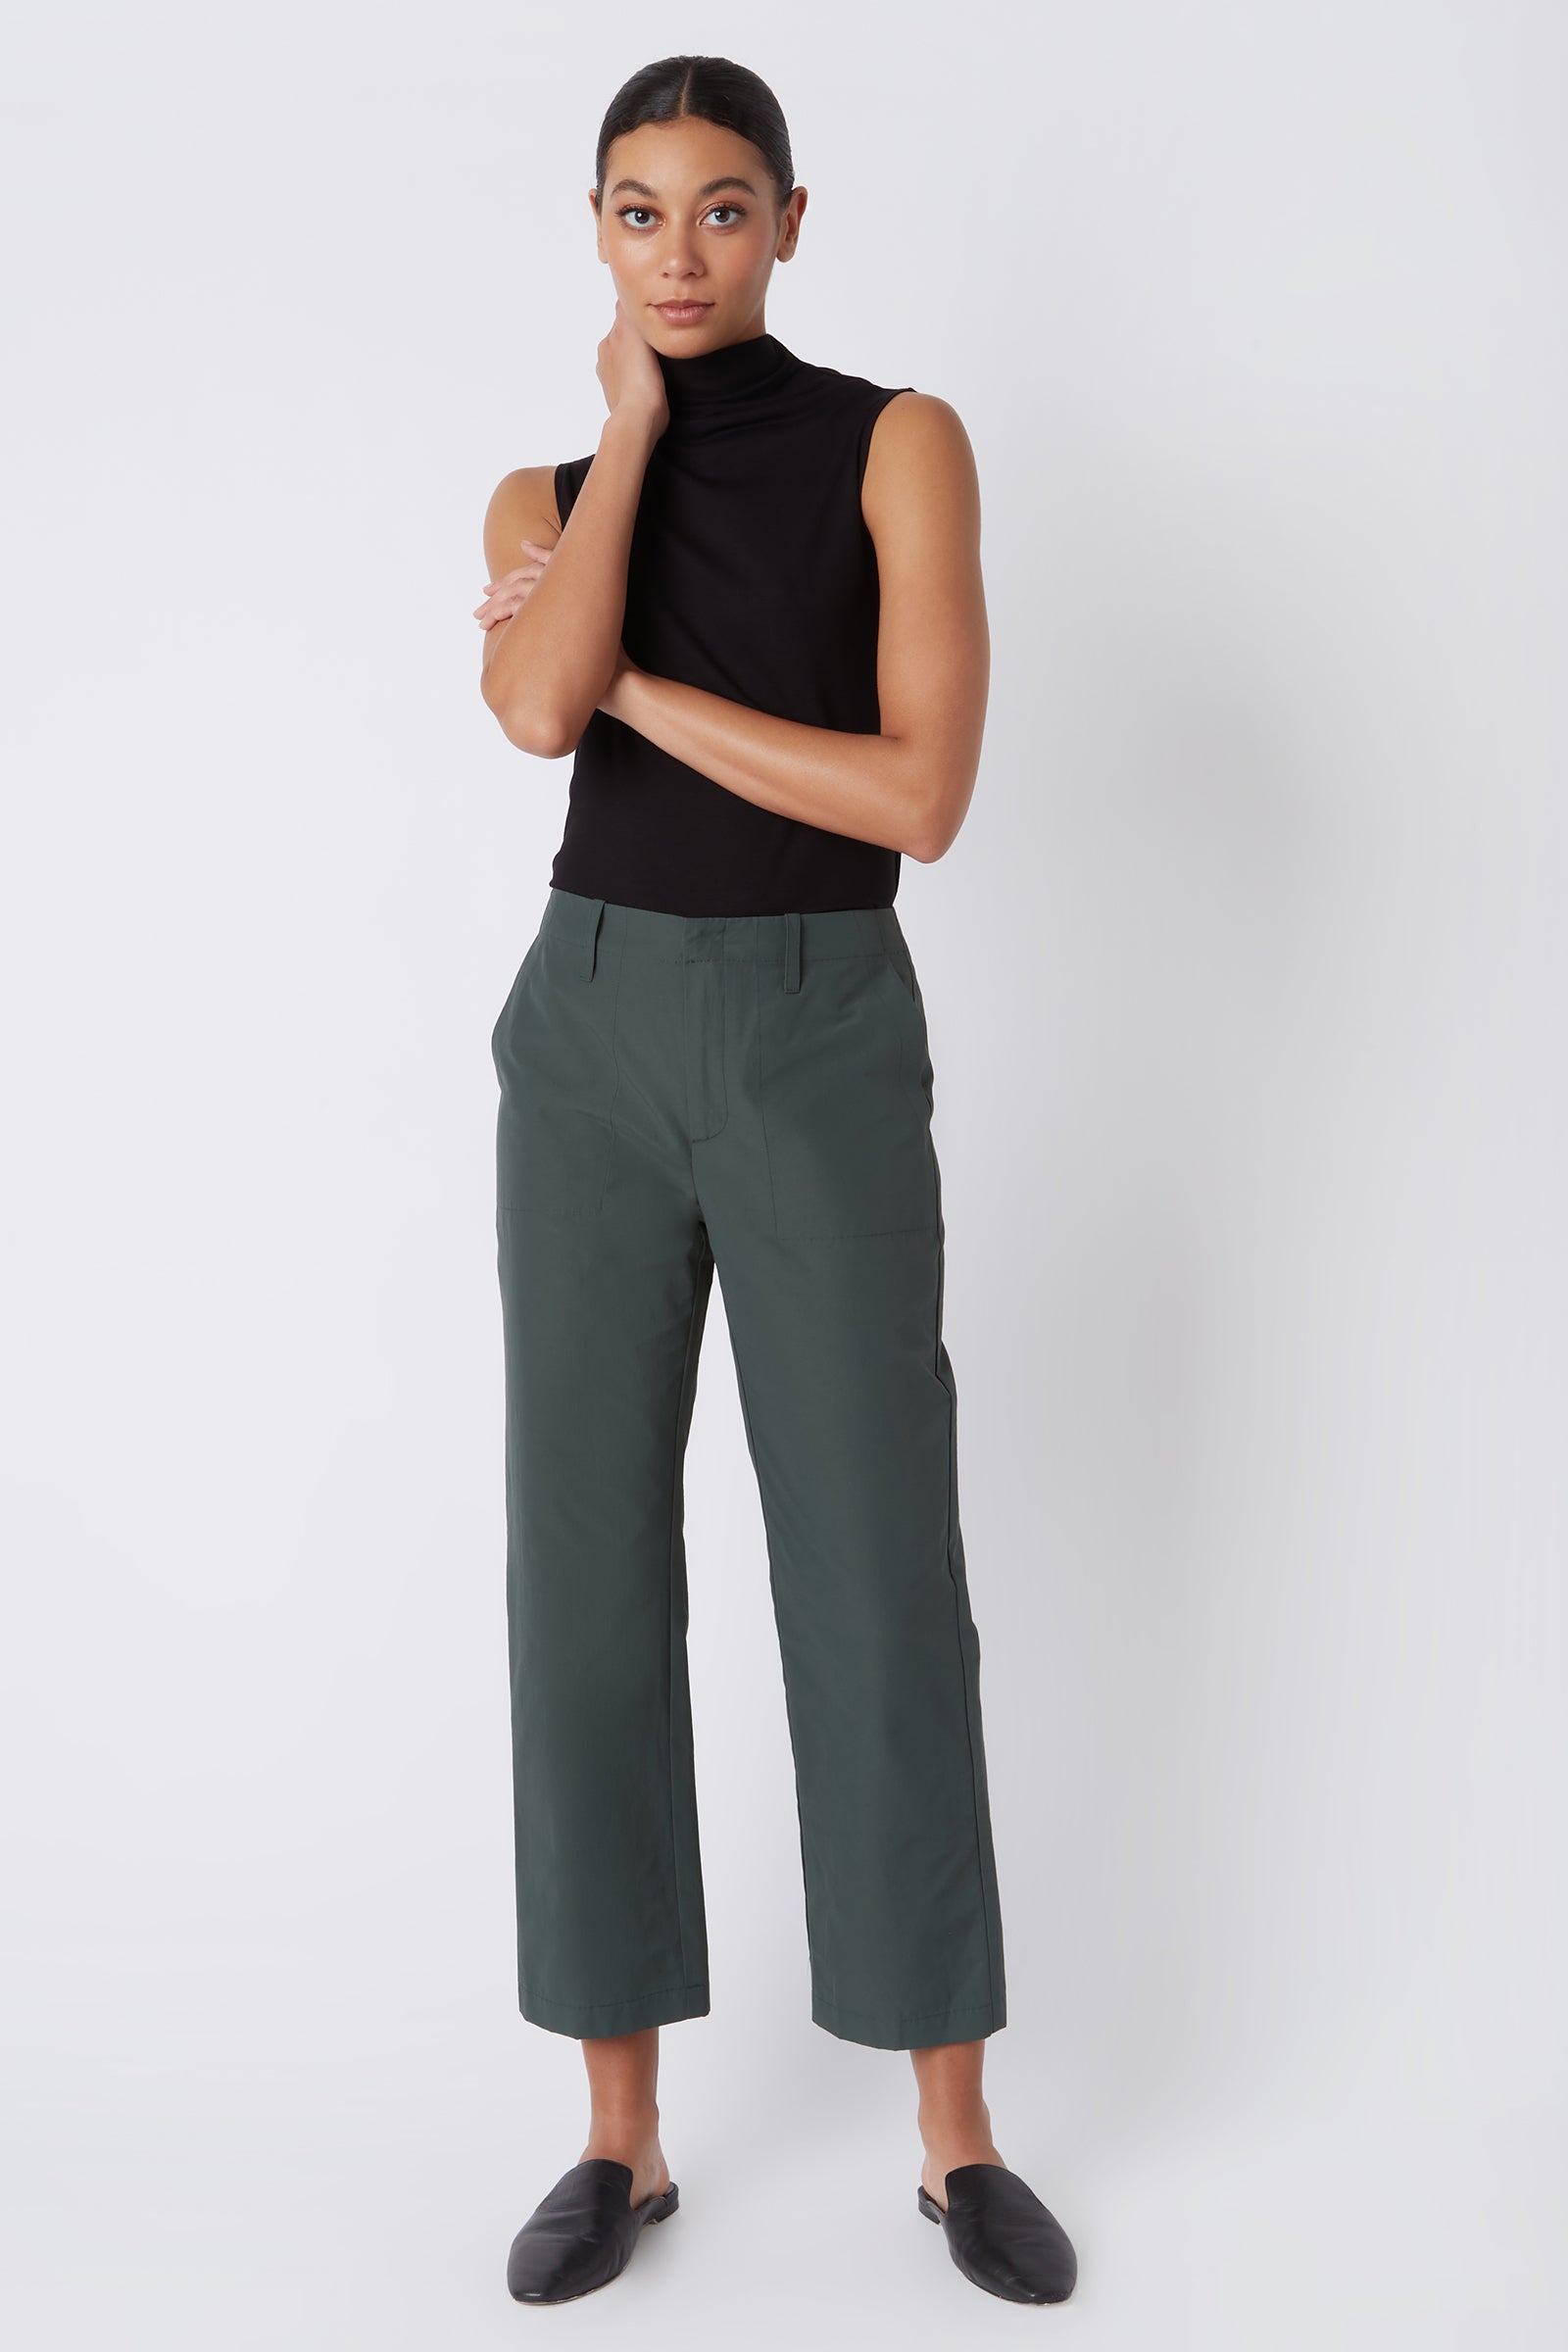 Kal Rieman Francoise Cigarette Pant in Loden Italian Broadcloth on Model with Hand on Neck Full Front View